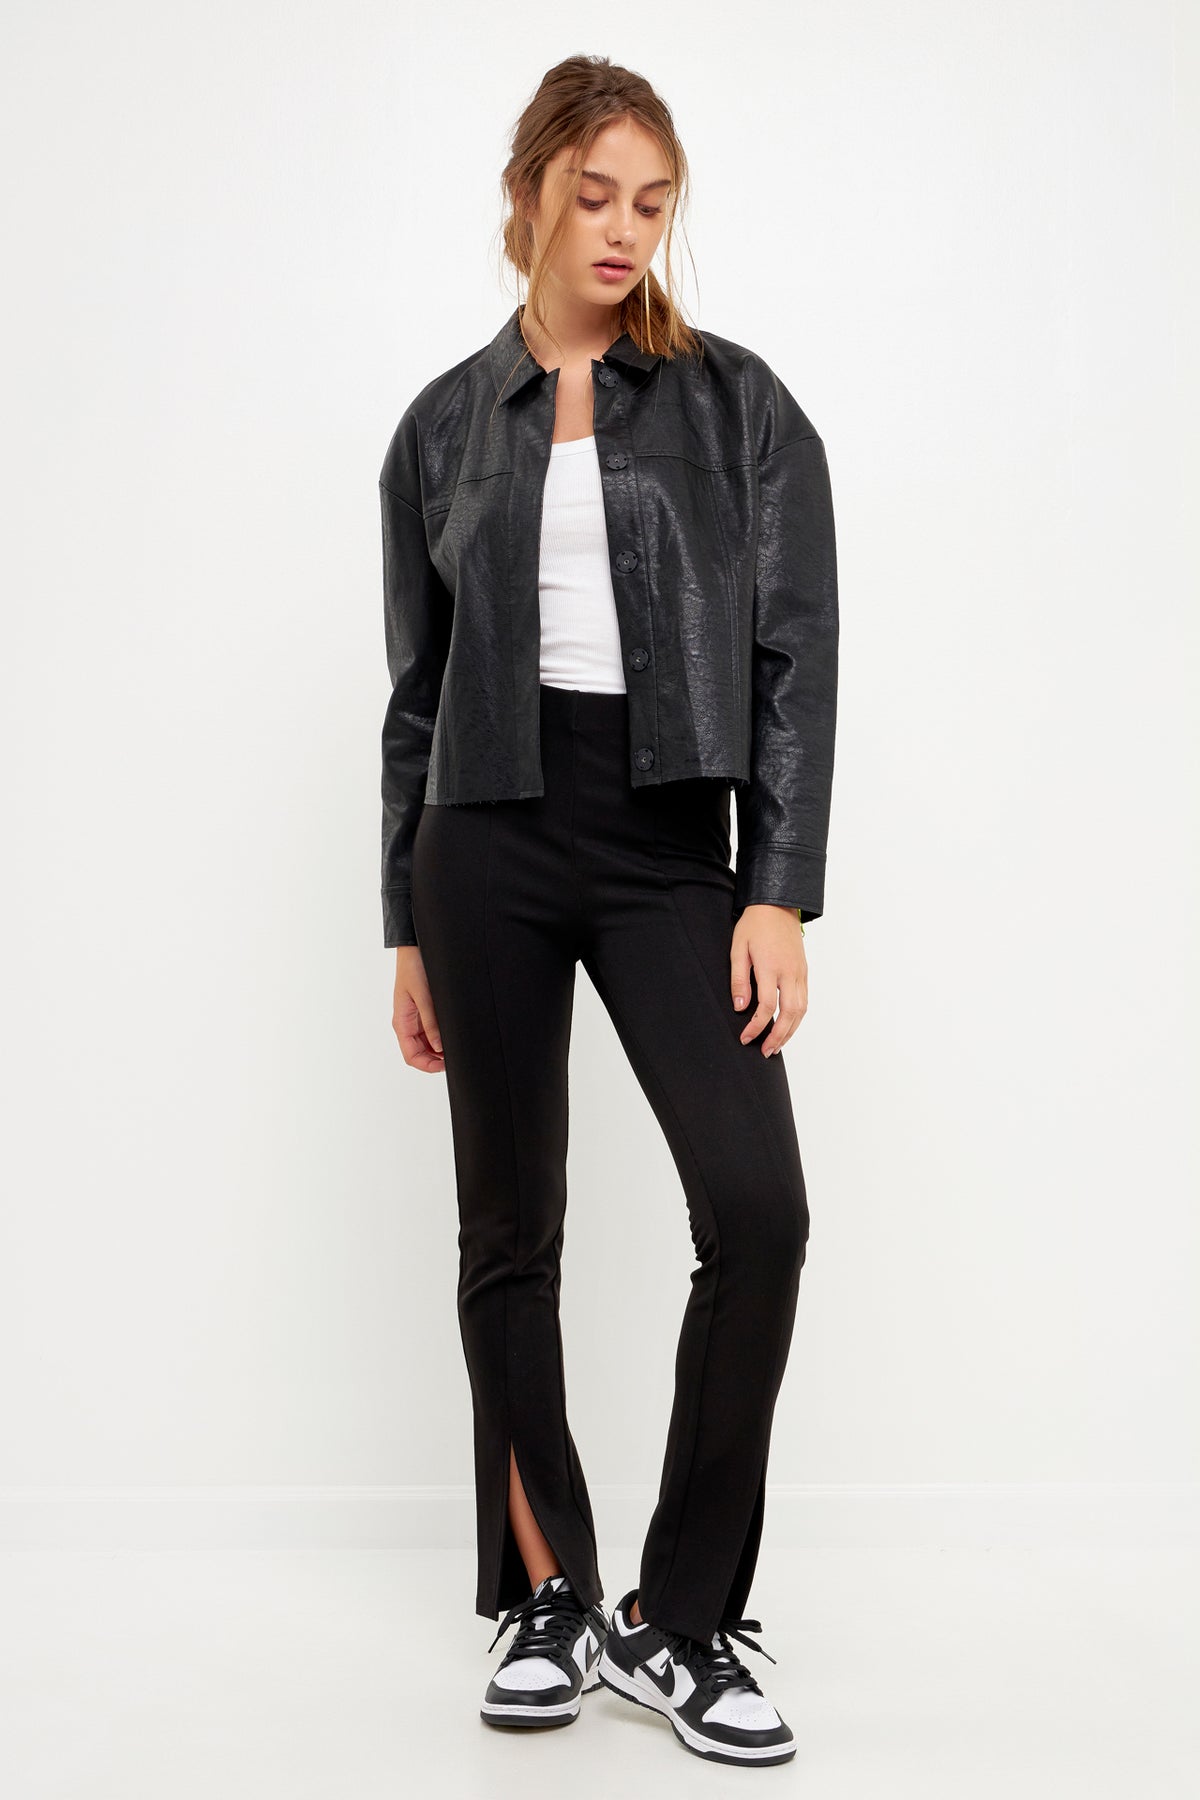 GREY LAB - Oversized Faux Leather Jacket - JACKETS available at Objectrare